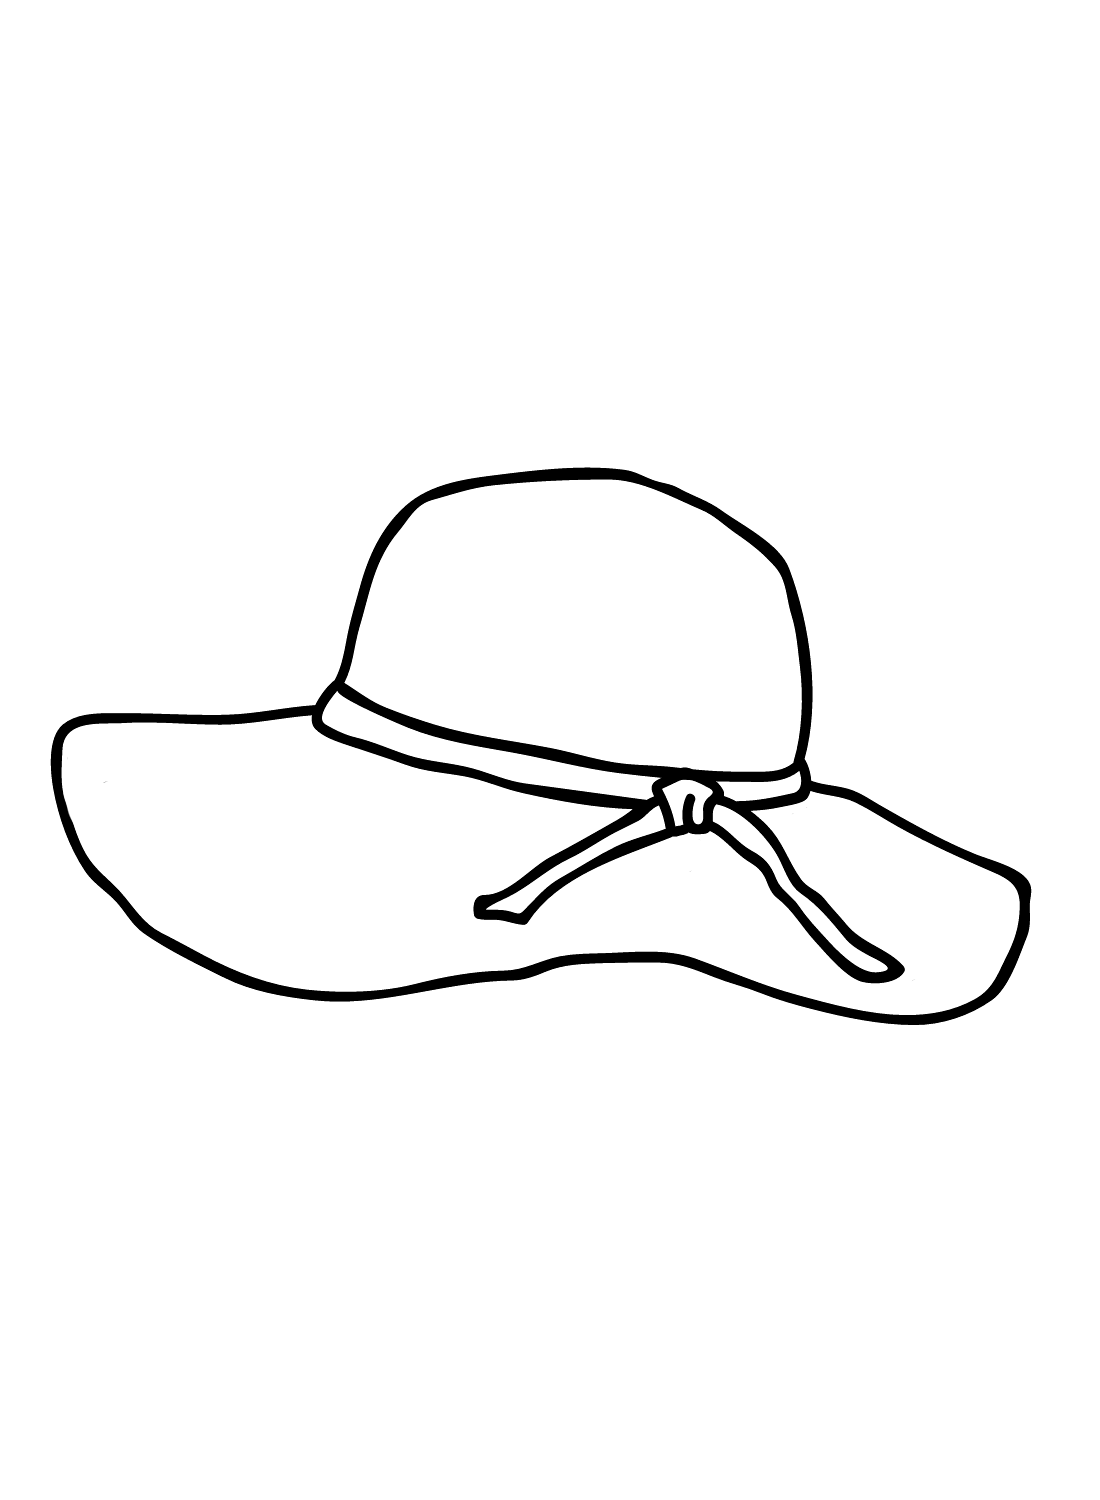 Hat Coloring Pages - Coloring Pages For Kids And Adults